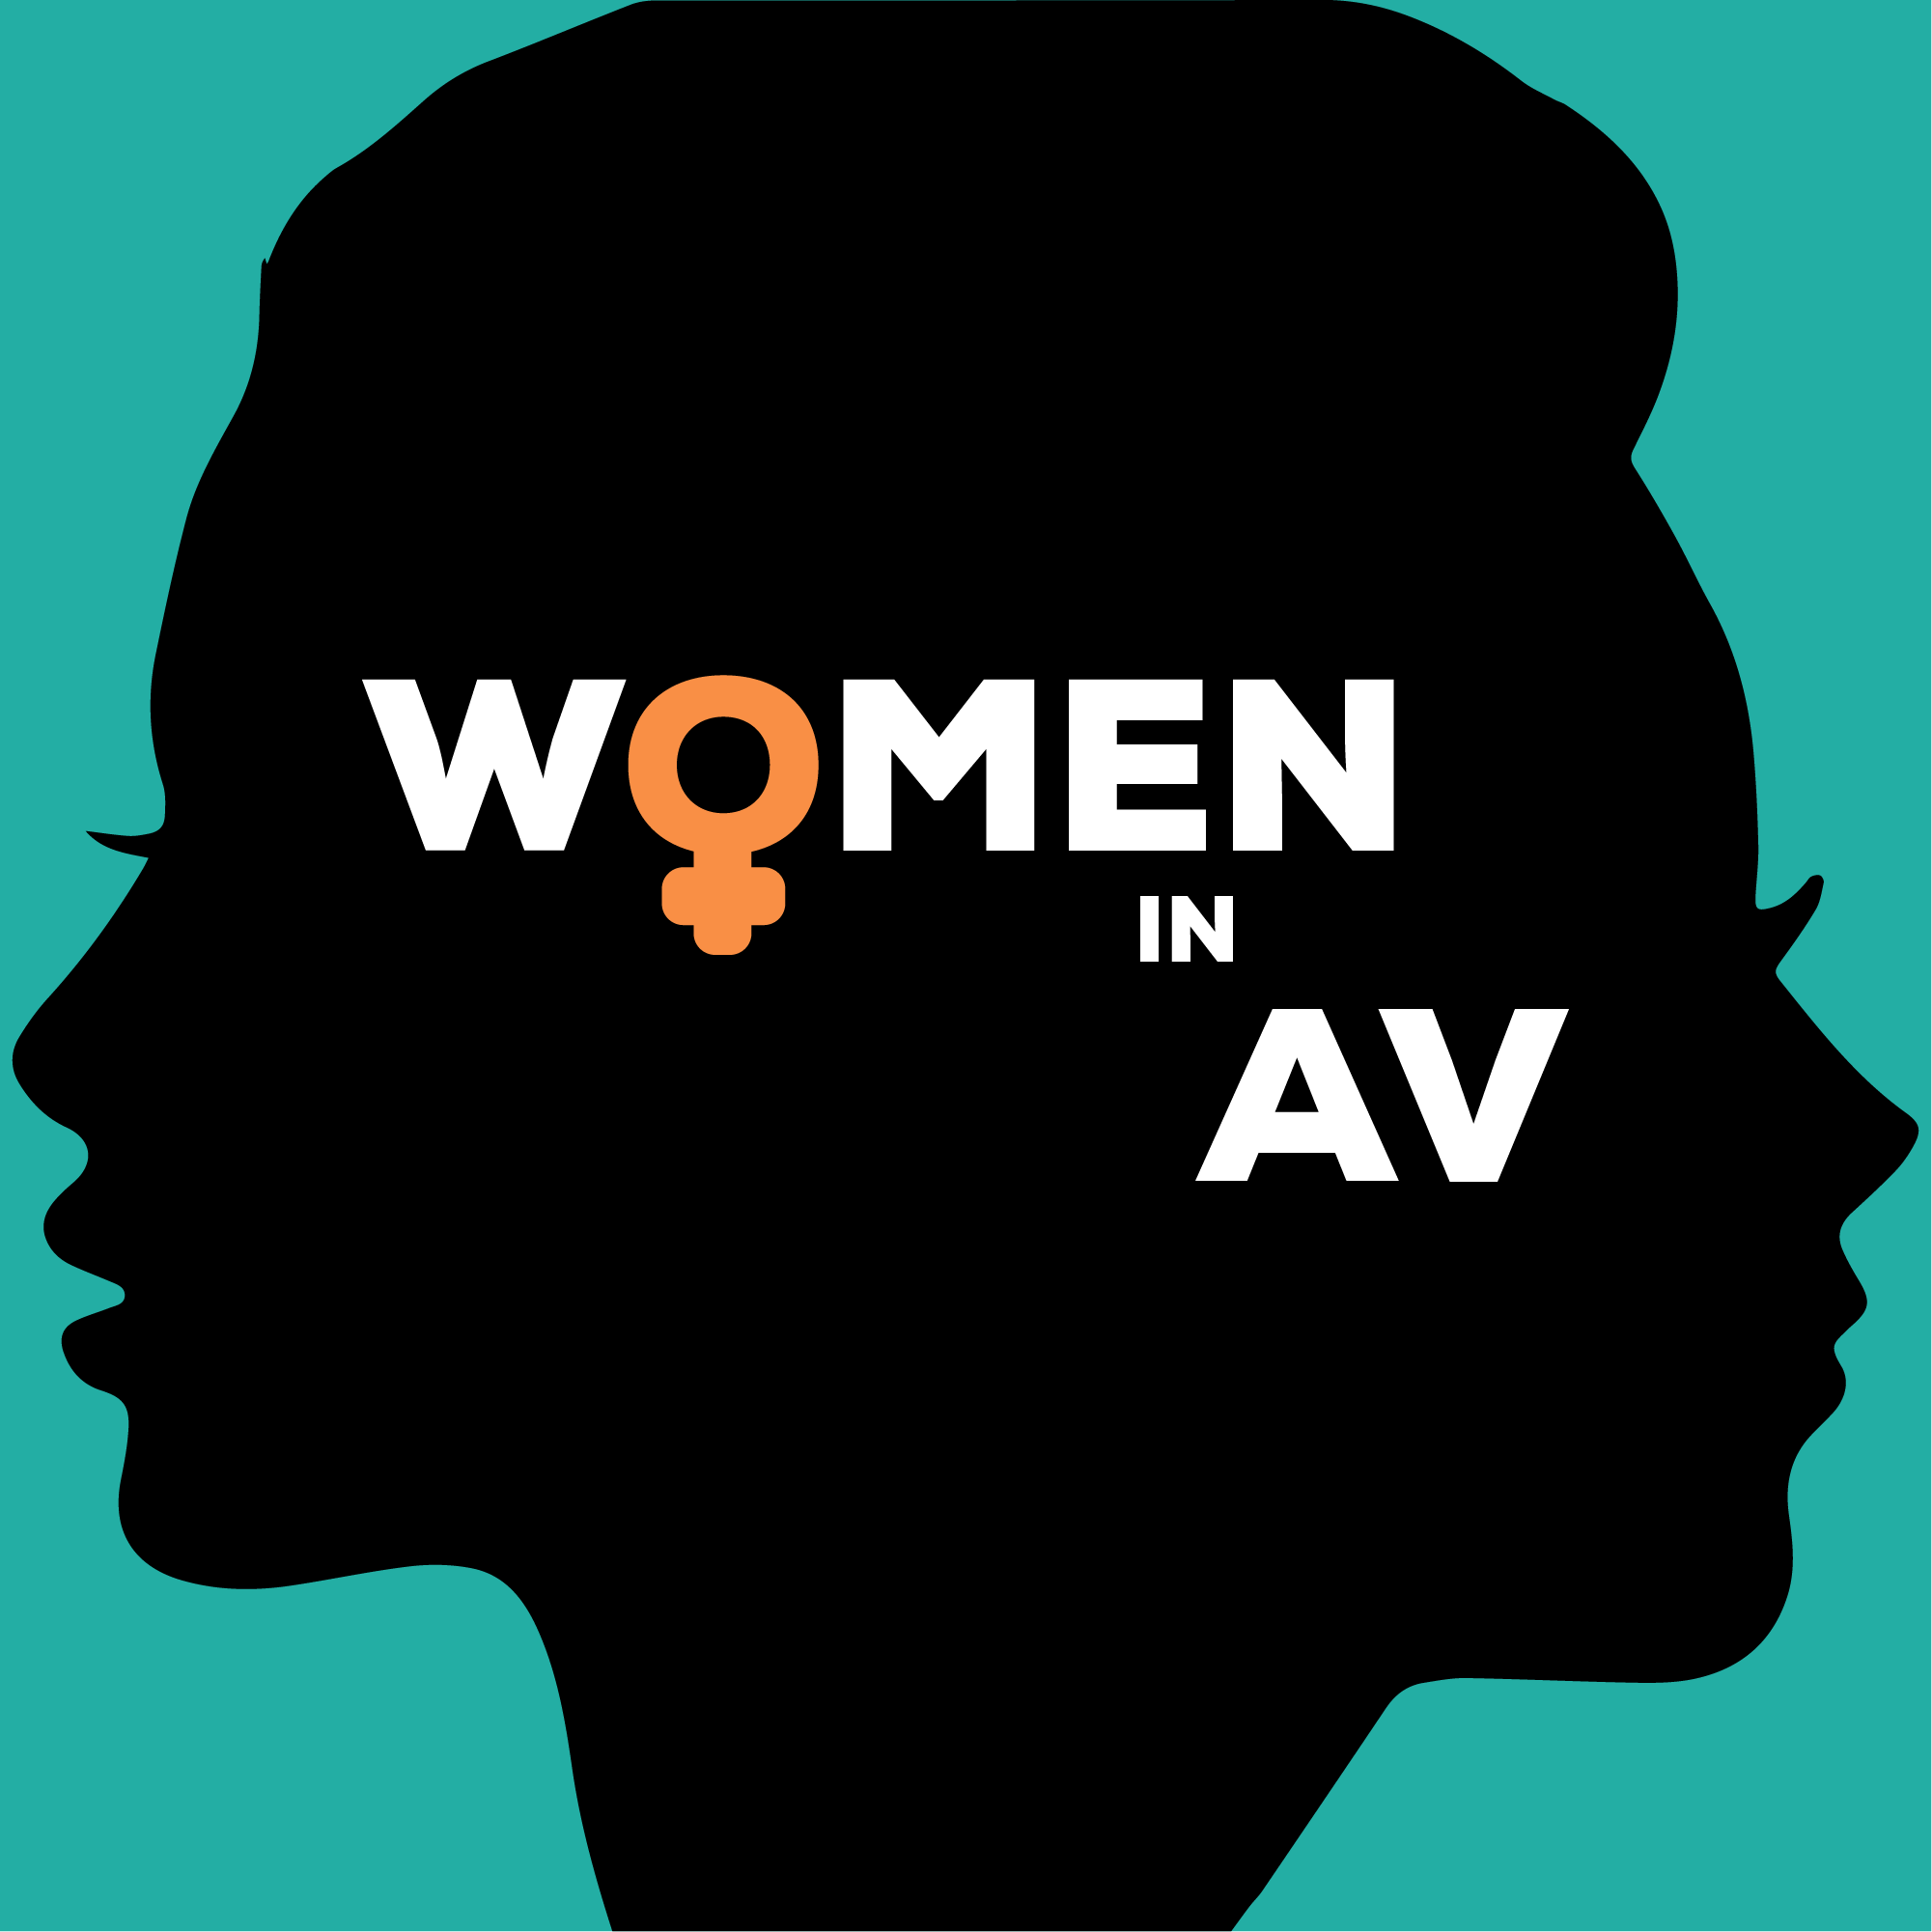 Talking to Rachel Archibald about her journey as a woman in the AV industry.